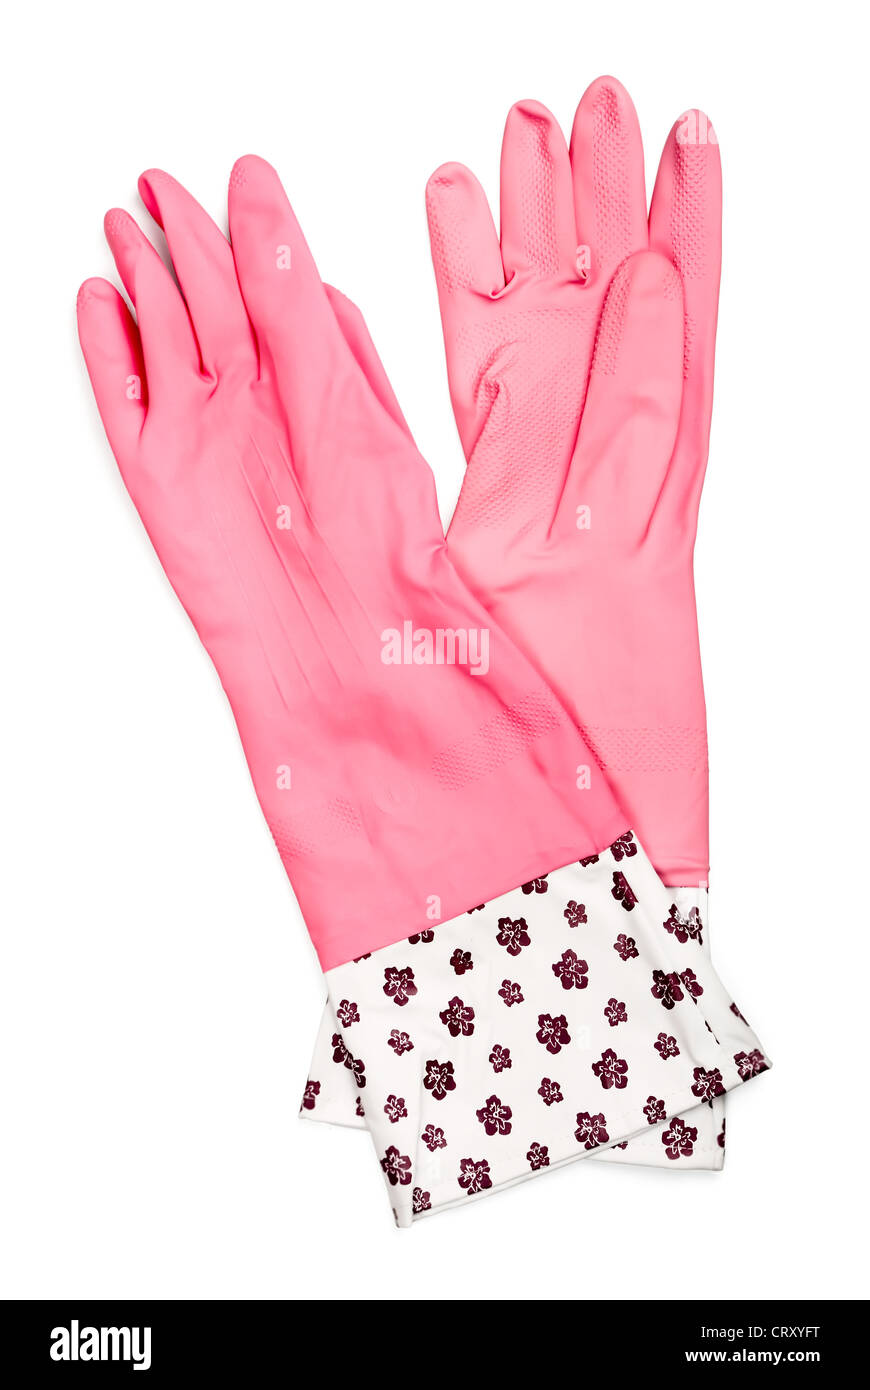 Pair of pink rubber gloves isolated on white Stock Photo